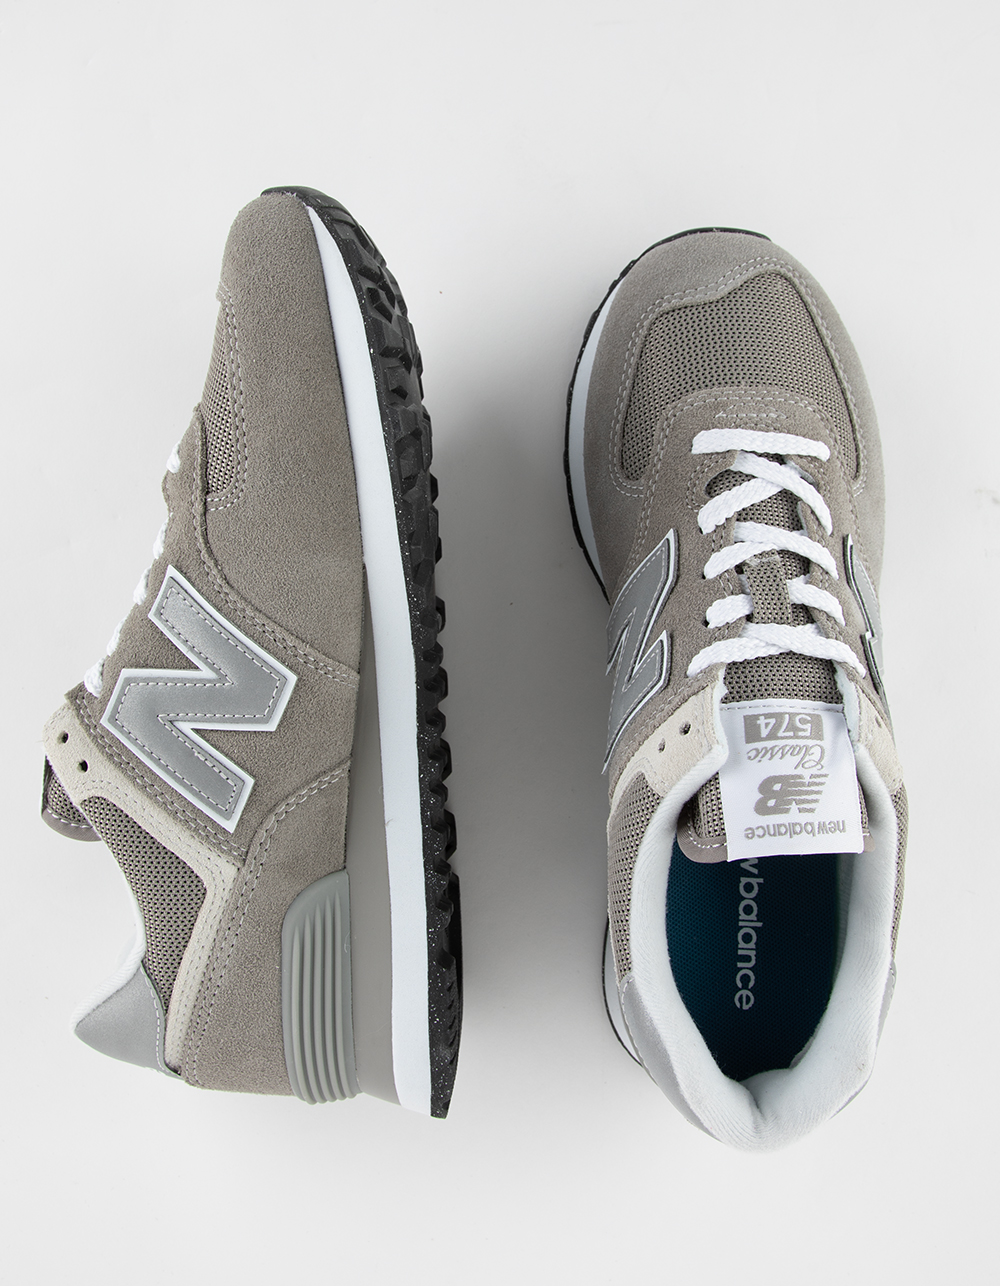 NEW BALANCE 574 Womens Shoes - GRAY/WHITE | Tillys